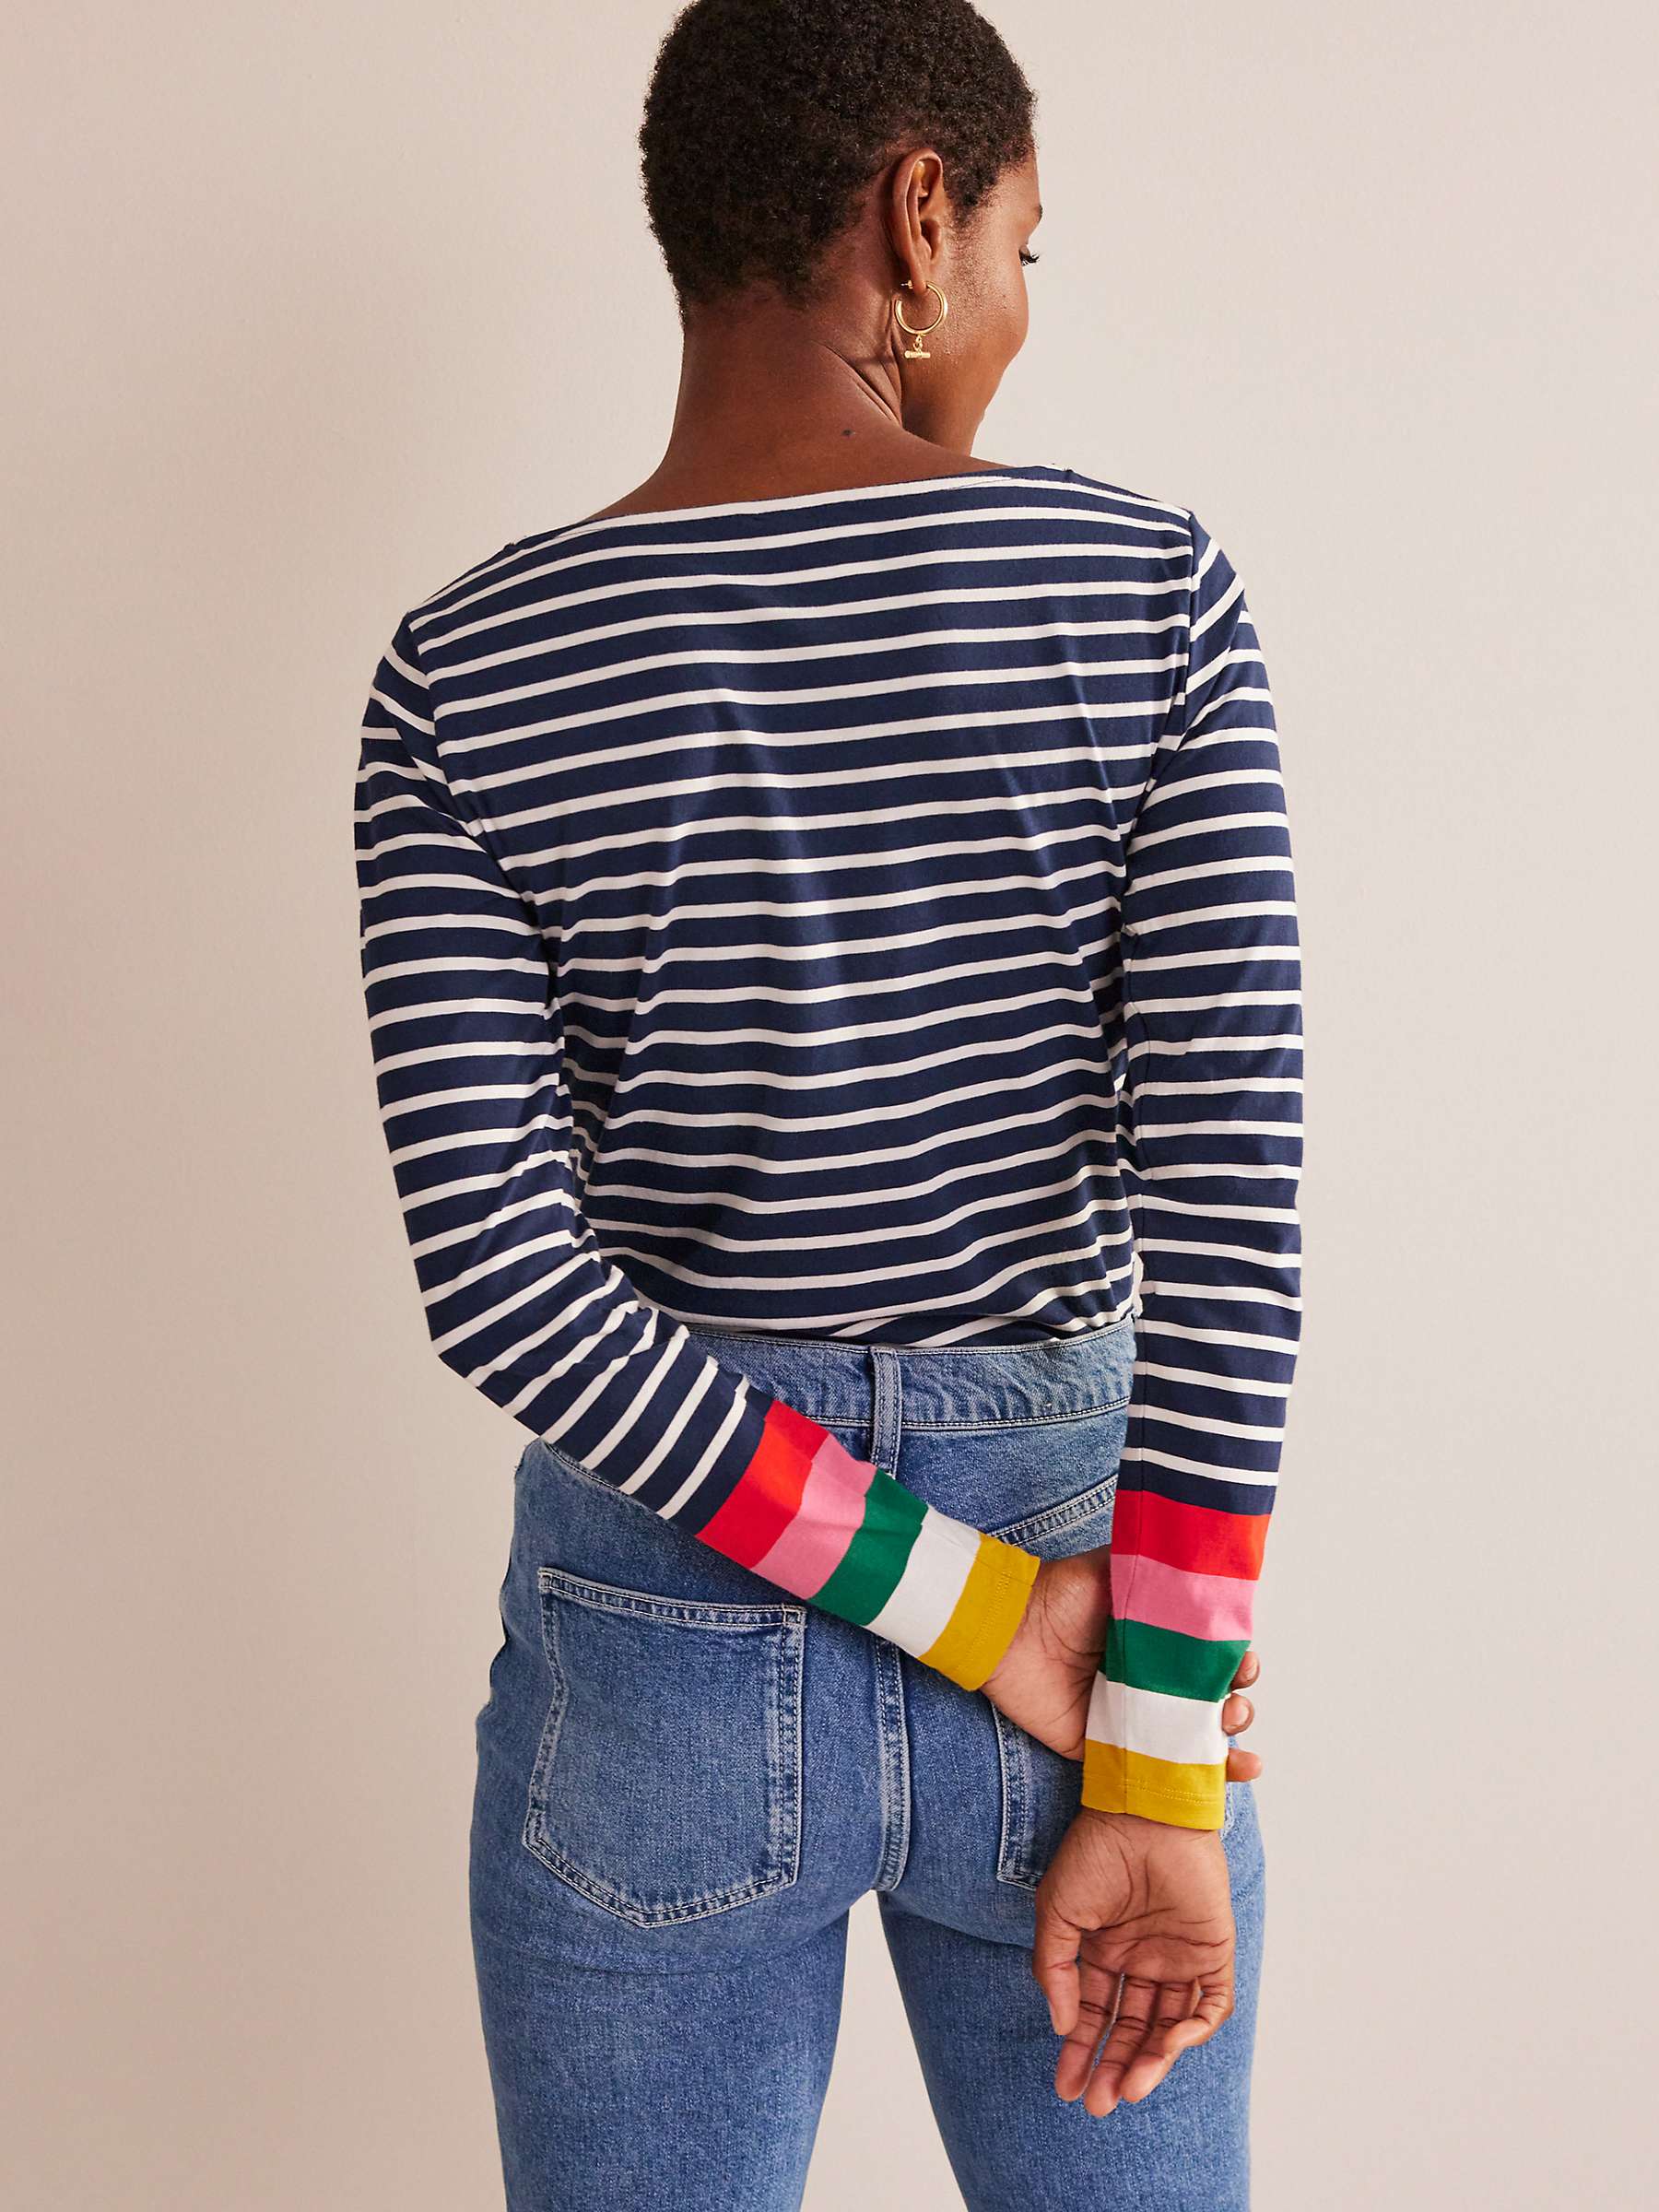 Buy Boden Ava Long Sleeve Cotton Stripe Top, Navy/Multi Cuff Online at johnlewis.com